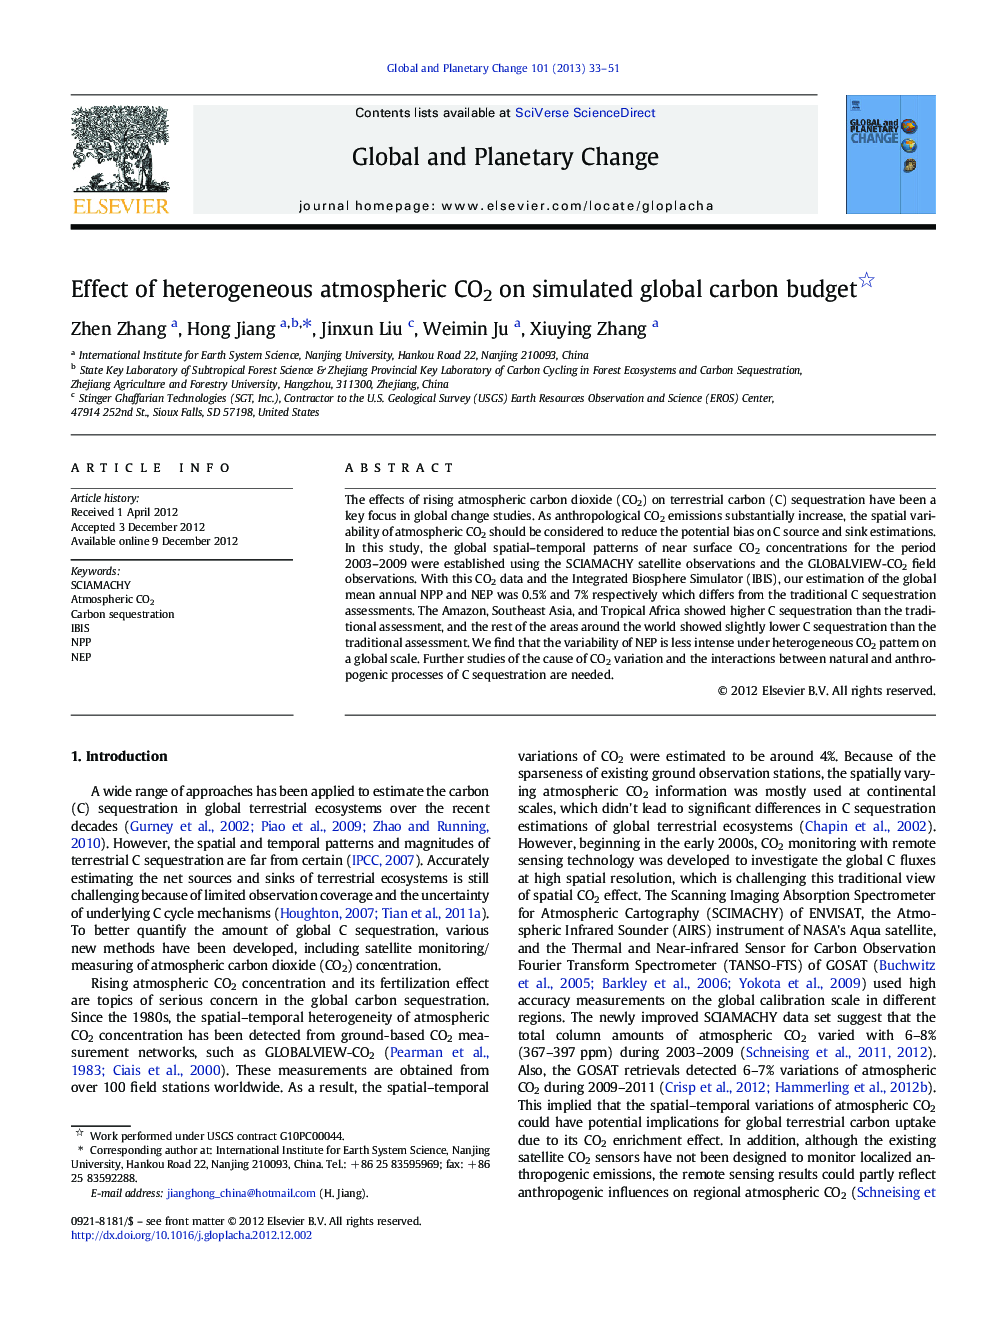 Effect of heterogeneous atmospheric CO2 on simulated global carbon budget 